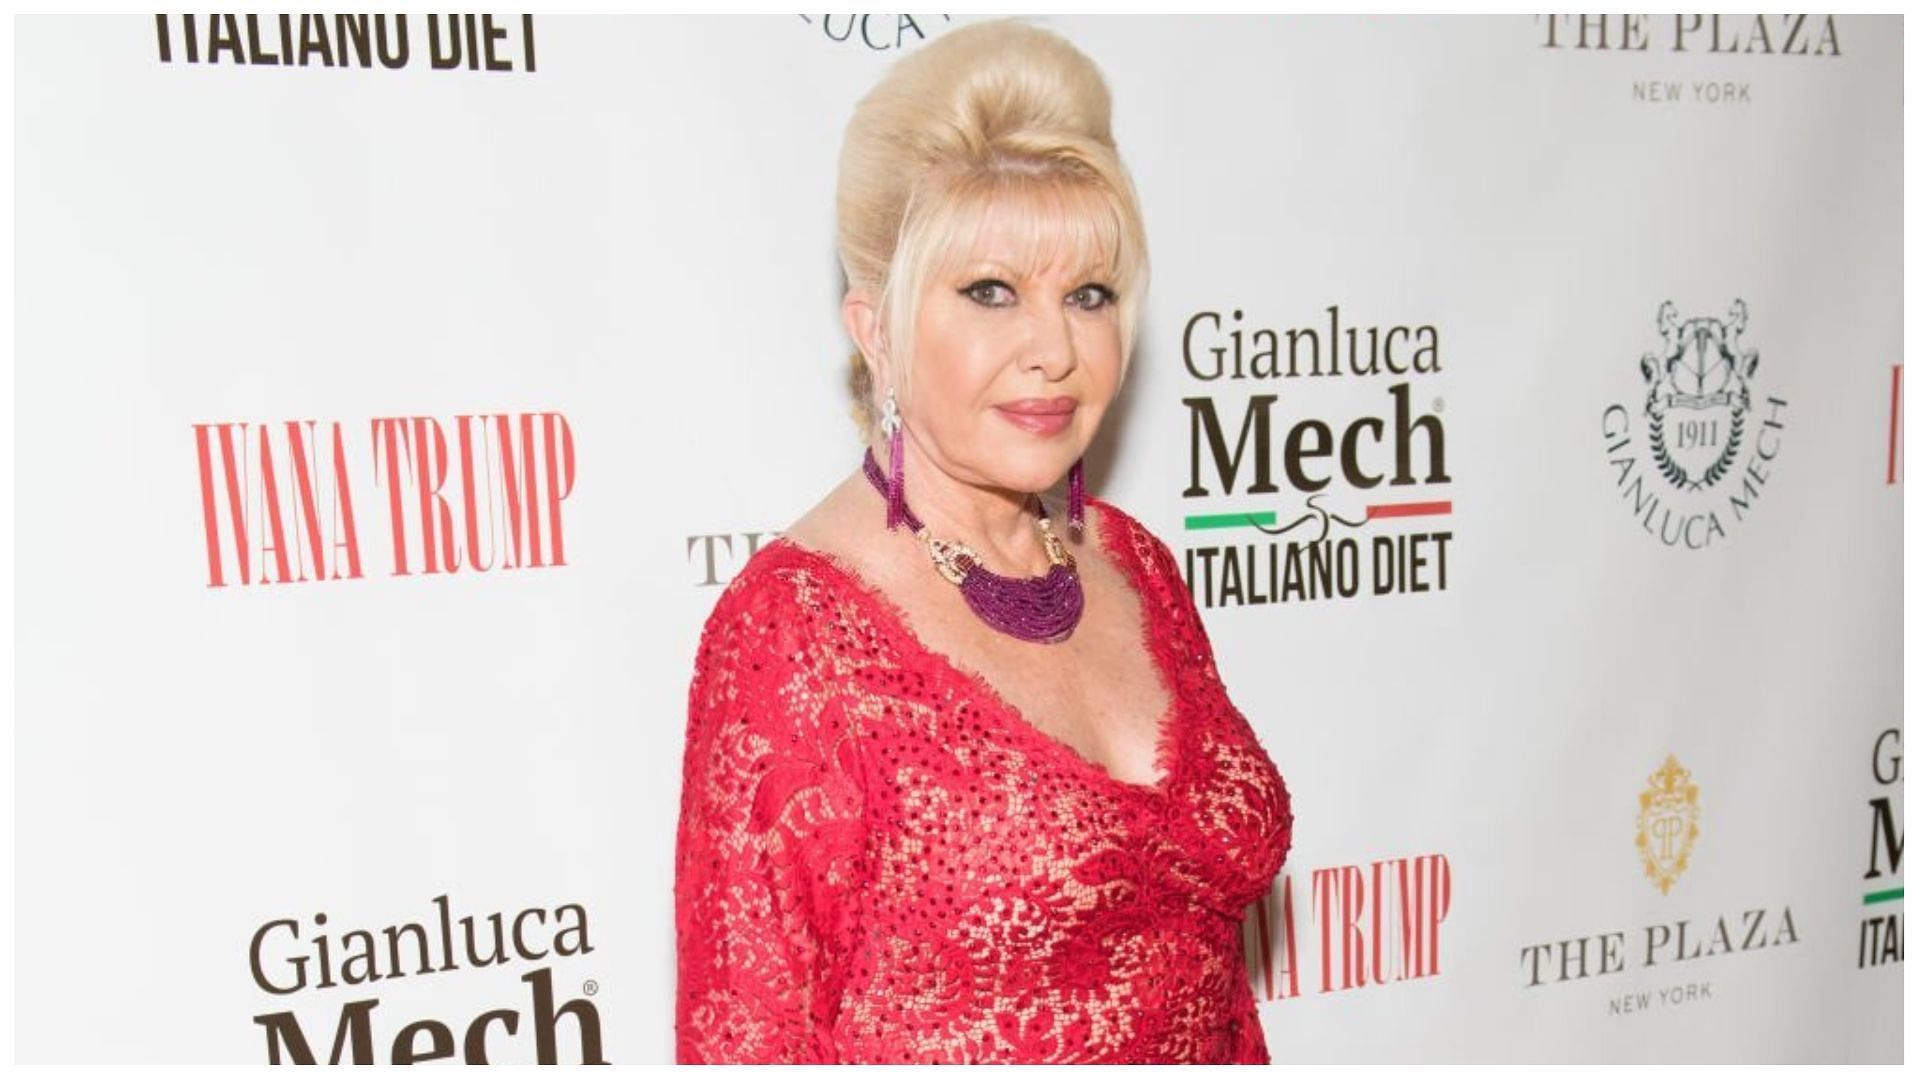 Ivana Trump accumulated a lot of wealth as an athlete, socialite and fashion model (Image via Noam Galai/Getty Images)